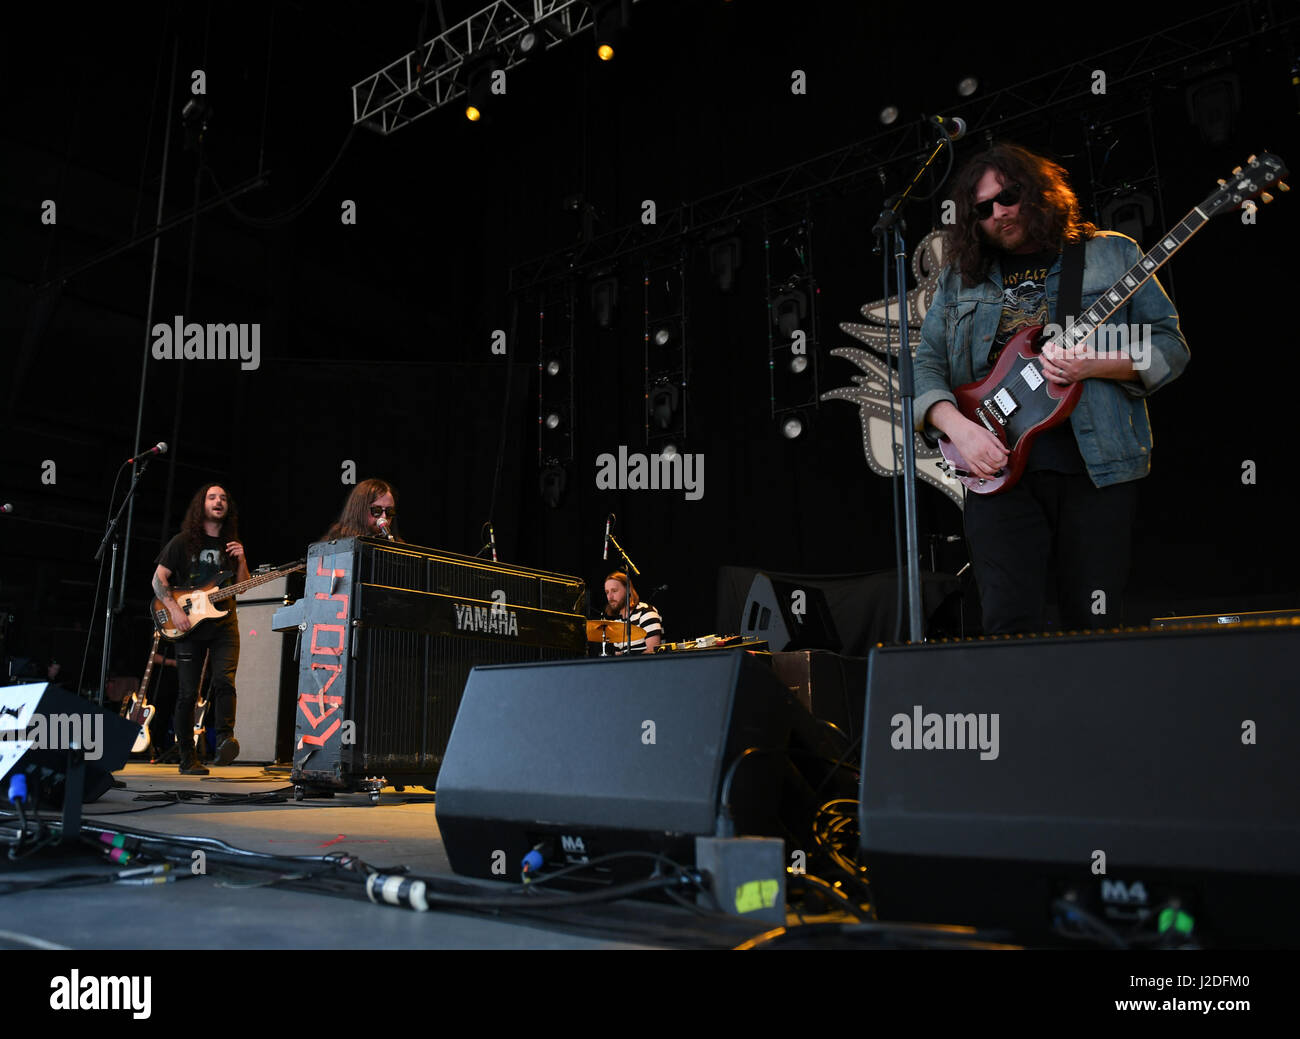 Portsmouth, VIRGINIA, USA. 25th Apr, 2017. J. RODDY WALSTON AND THE BUSINESS, american rock band gets the crowd started at the .to THE PORTSMOUTH PAVILION in PORTSMOUTH, VIRGINIA on 26 APRIL 2017. © Jeff Moore 2017 Credit: Jeff Moore/ZUMA Wire/Alamy Live News Stock Photo